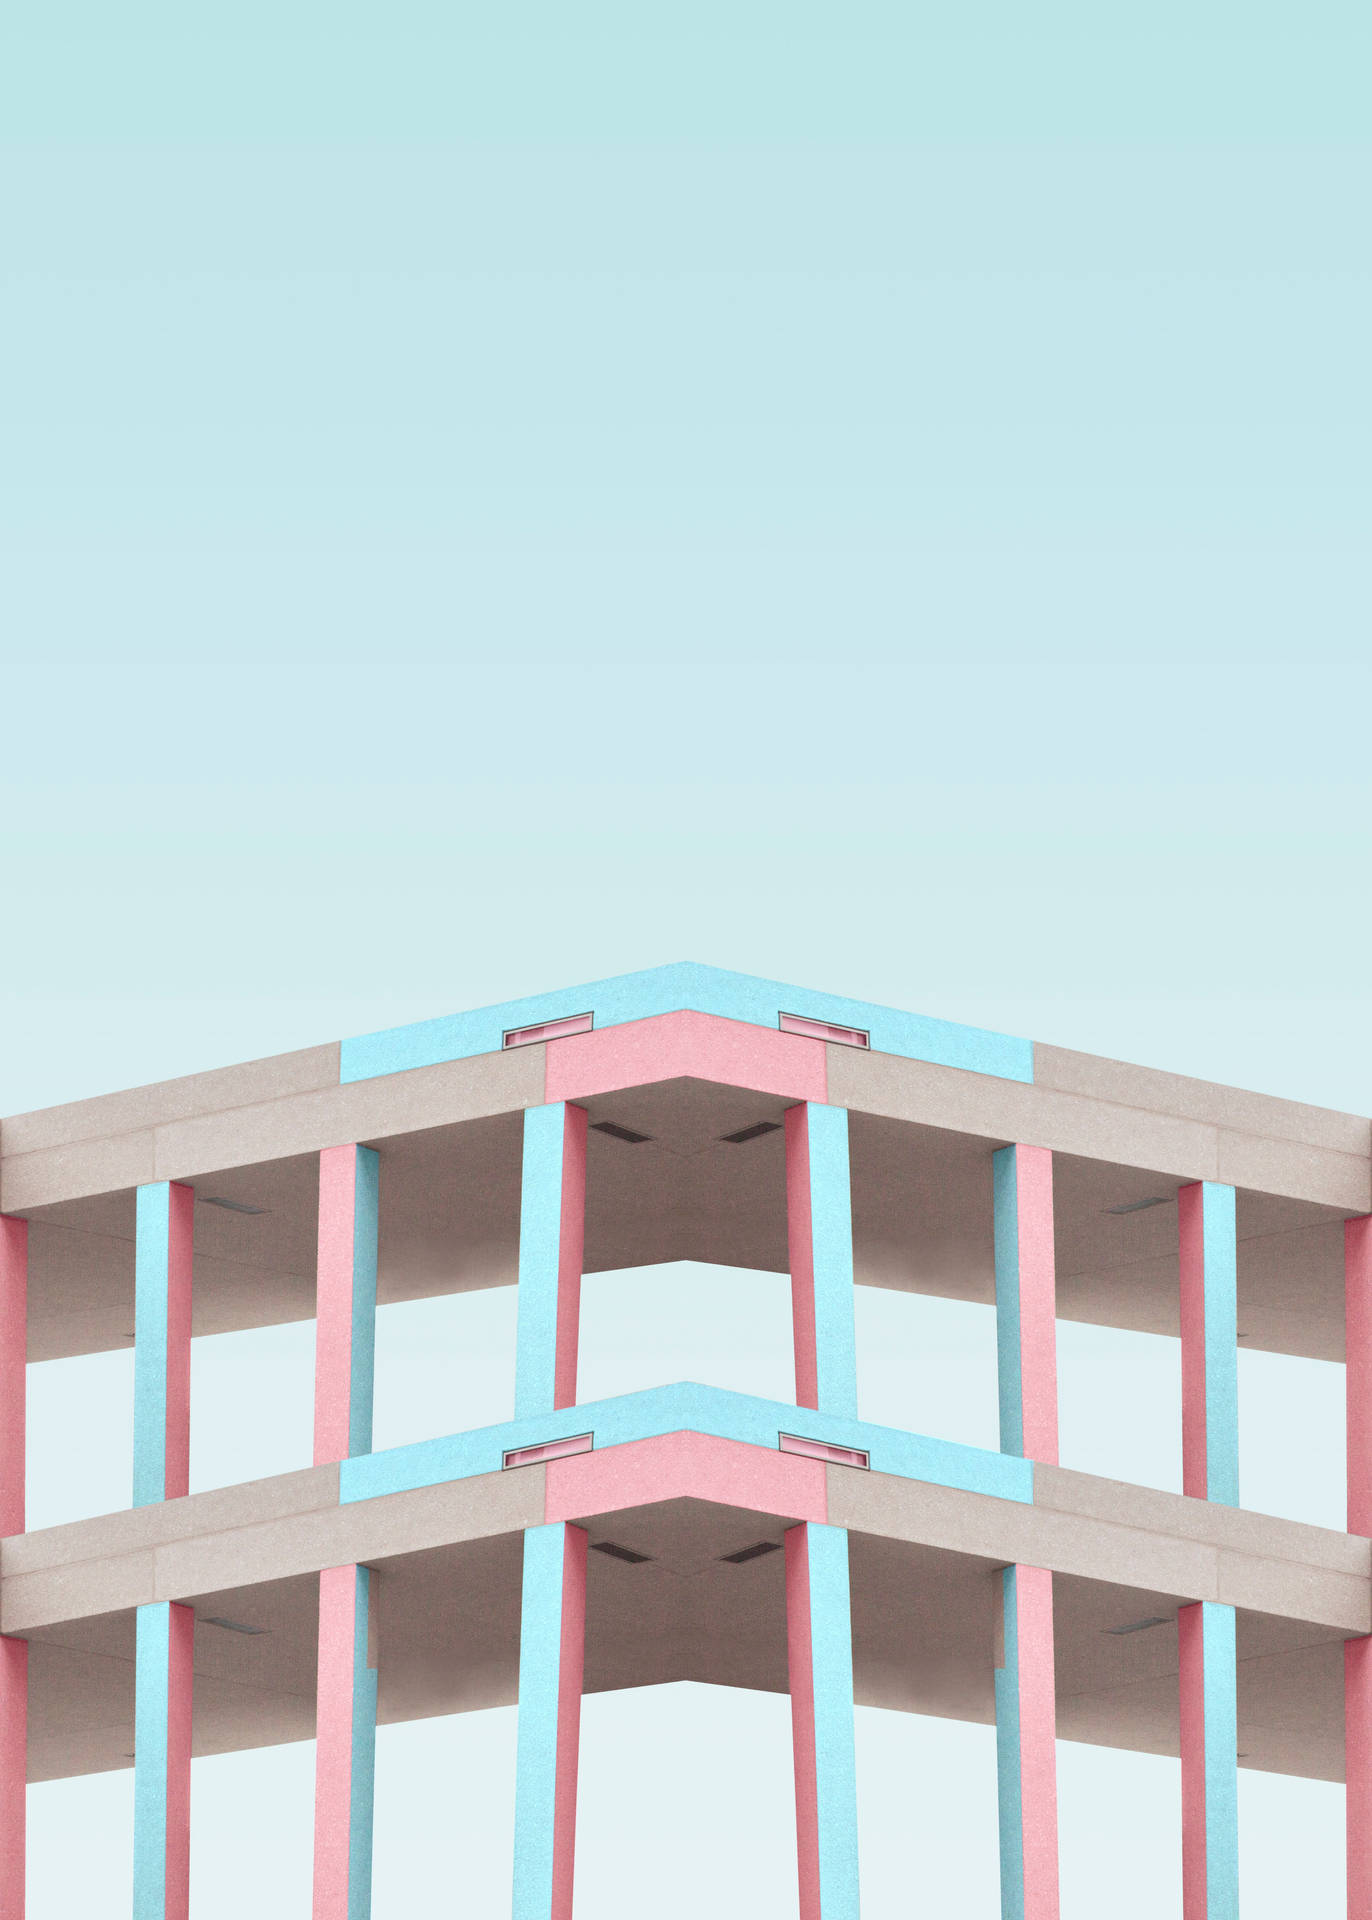 Minimal Blue And Pink Building Architecture Background